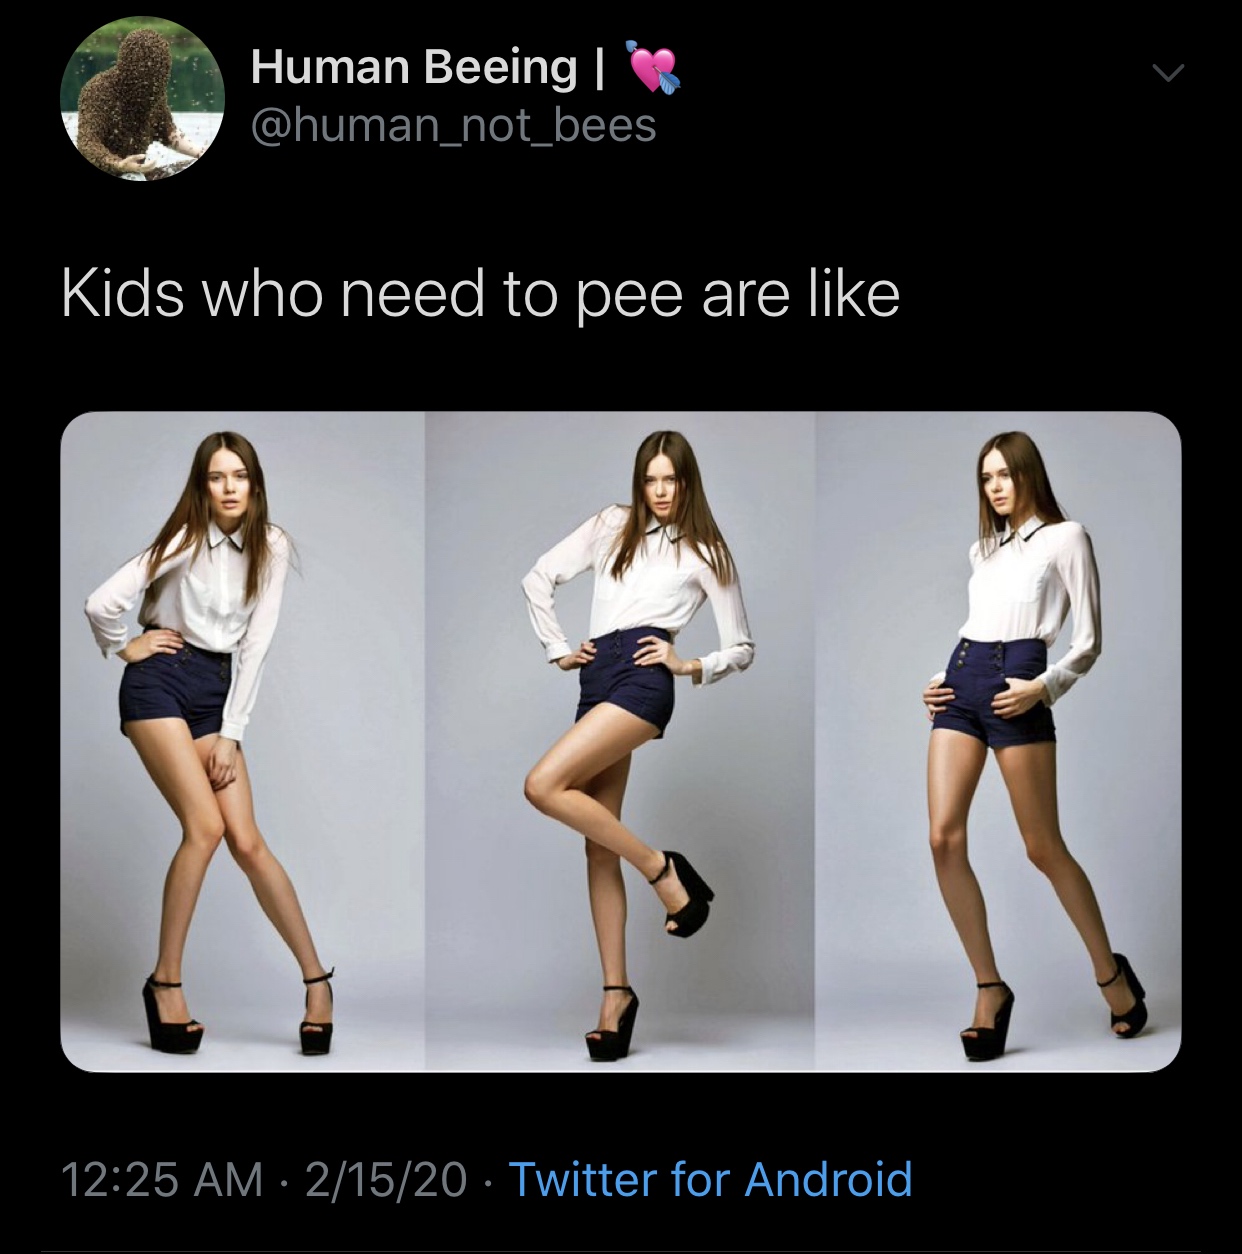 shoulder - Human Beeing | 3 Kids who need to pee are 21520 Twitter for Android